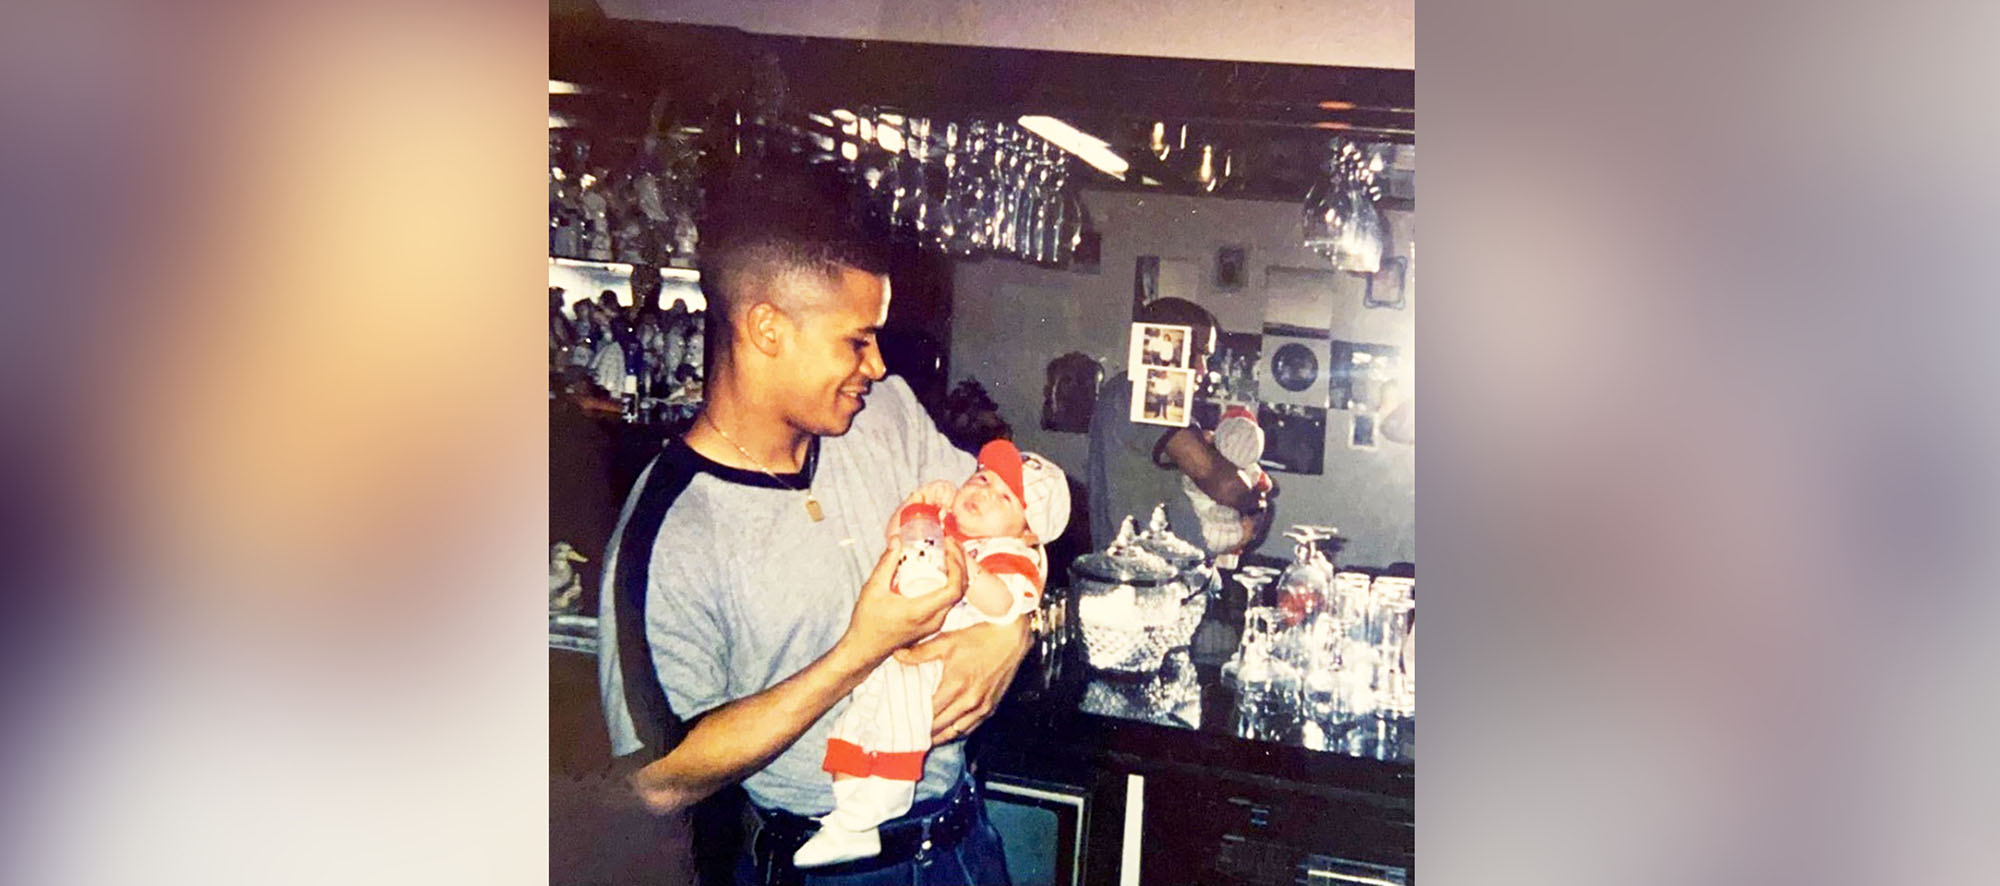 PHOTO: Kelvin Silva holds his son, Kelvin Jr. Silva came to the United States in 1988, where he joined his father who was a naturalized United States citizen.